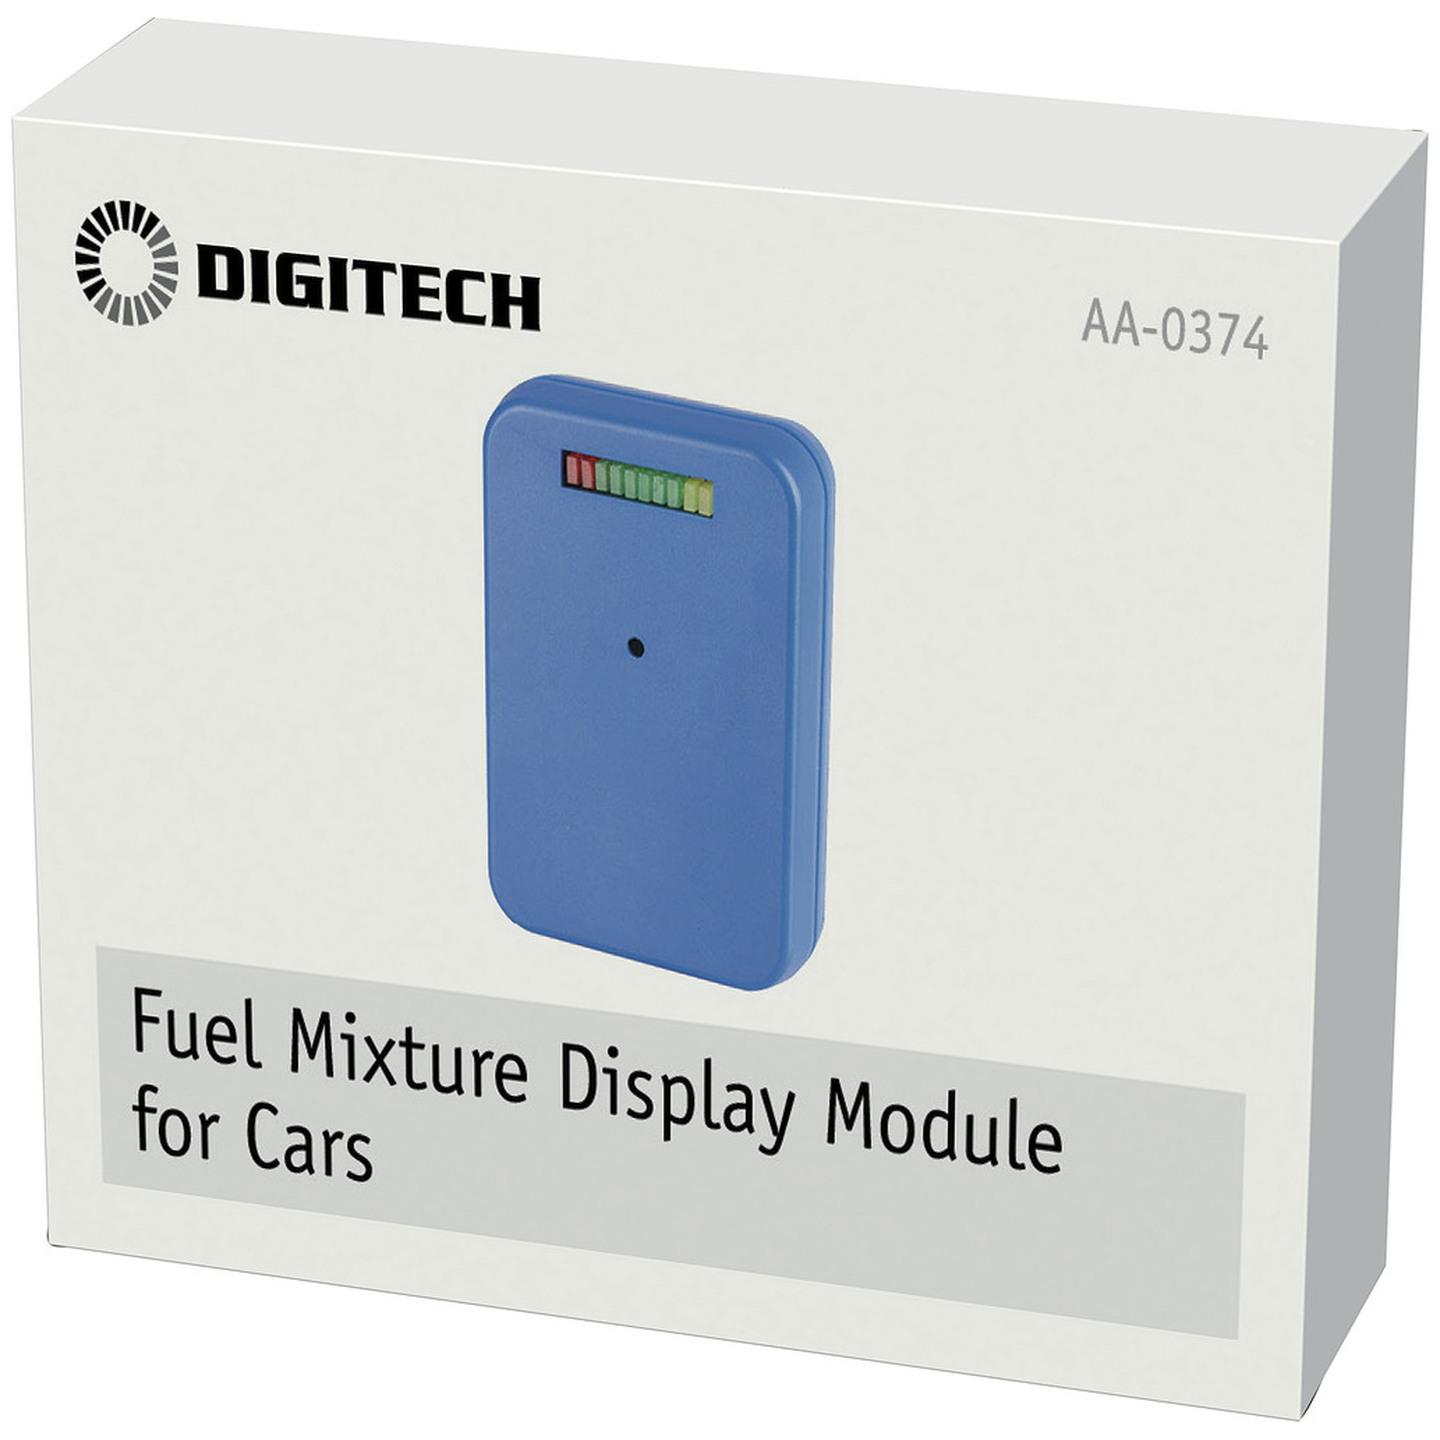 Fuel Mixture Display Module for Cars